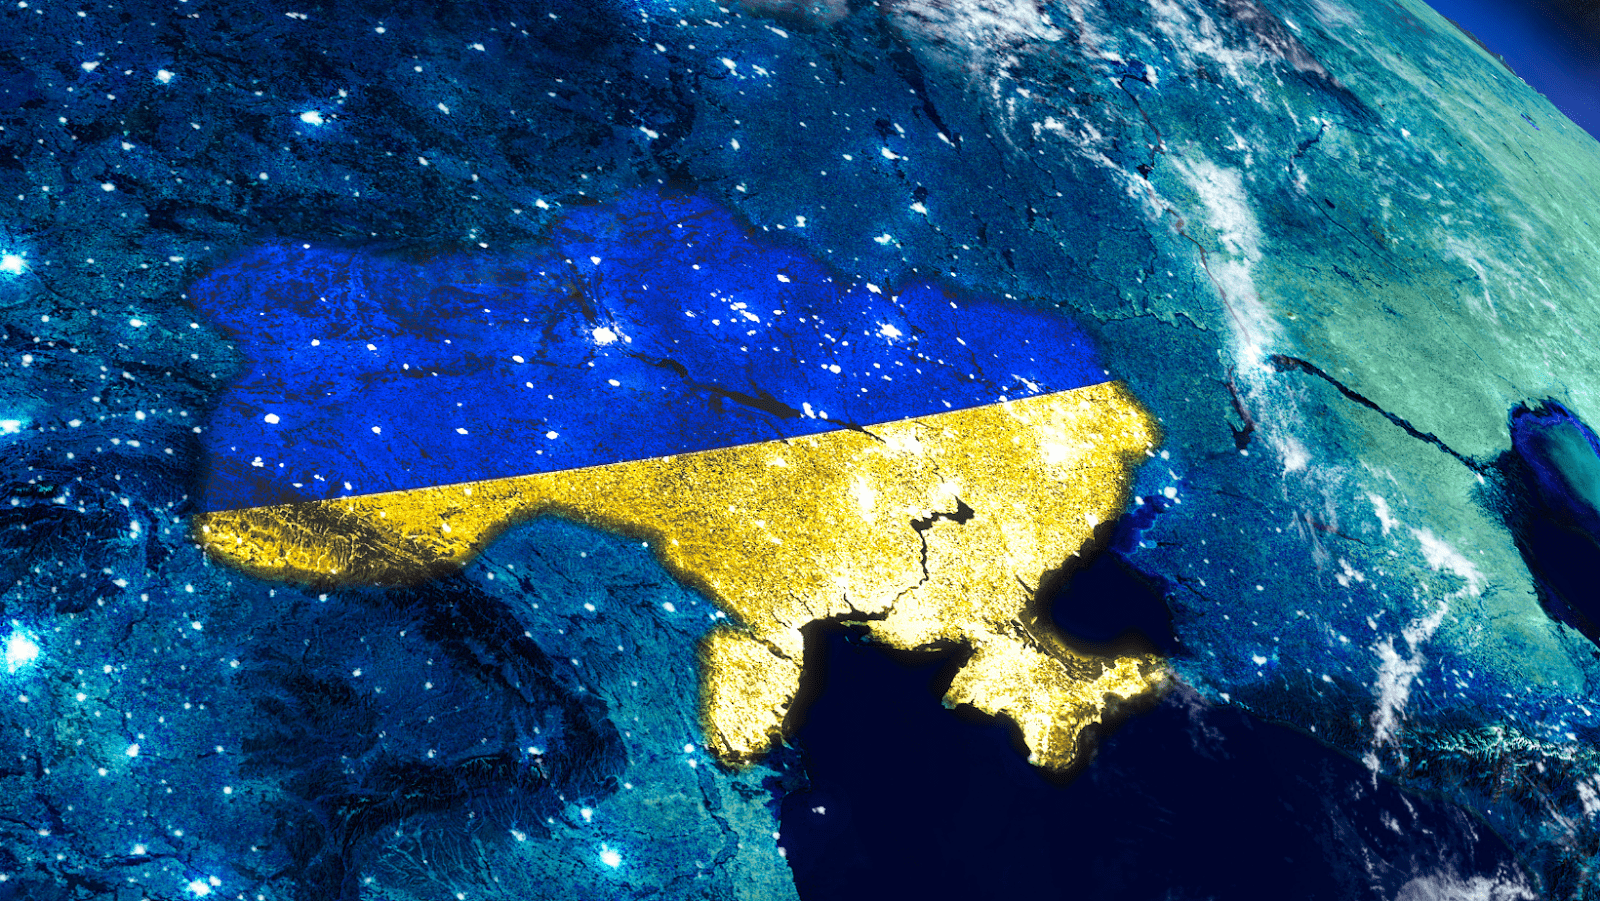 Sattelite image of Ukraine at night with Ukrainian flag superimposed over the country's borders